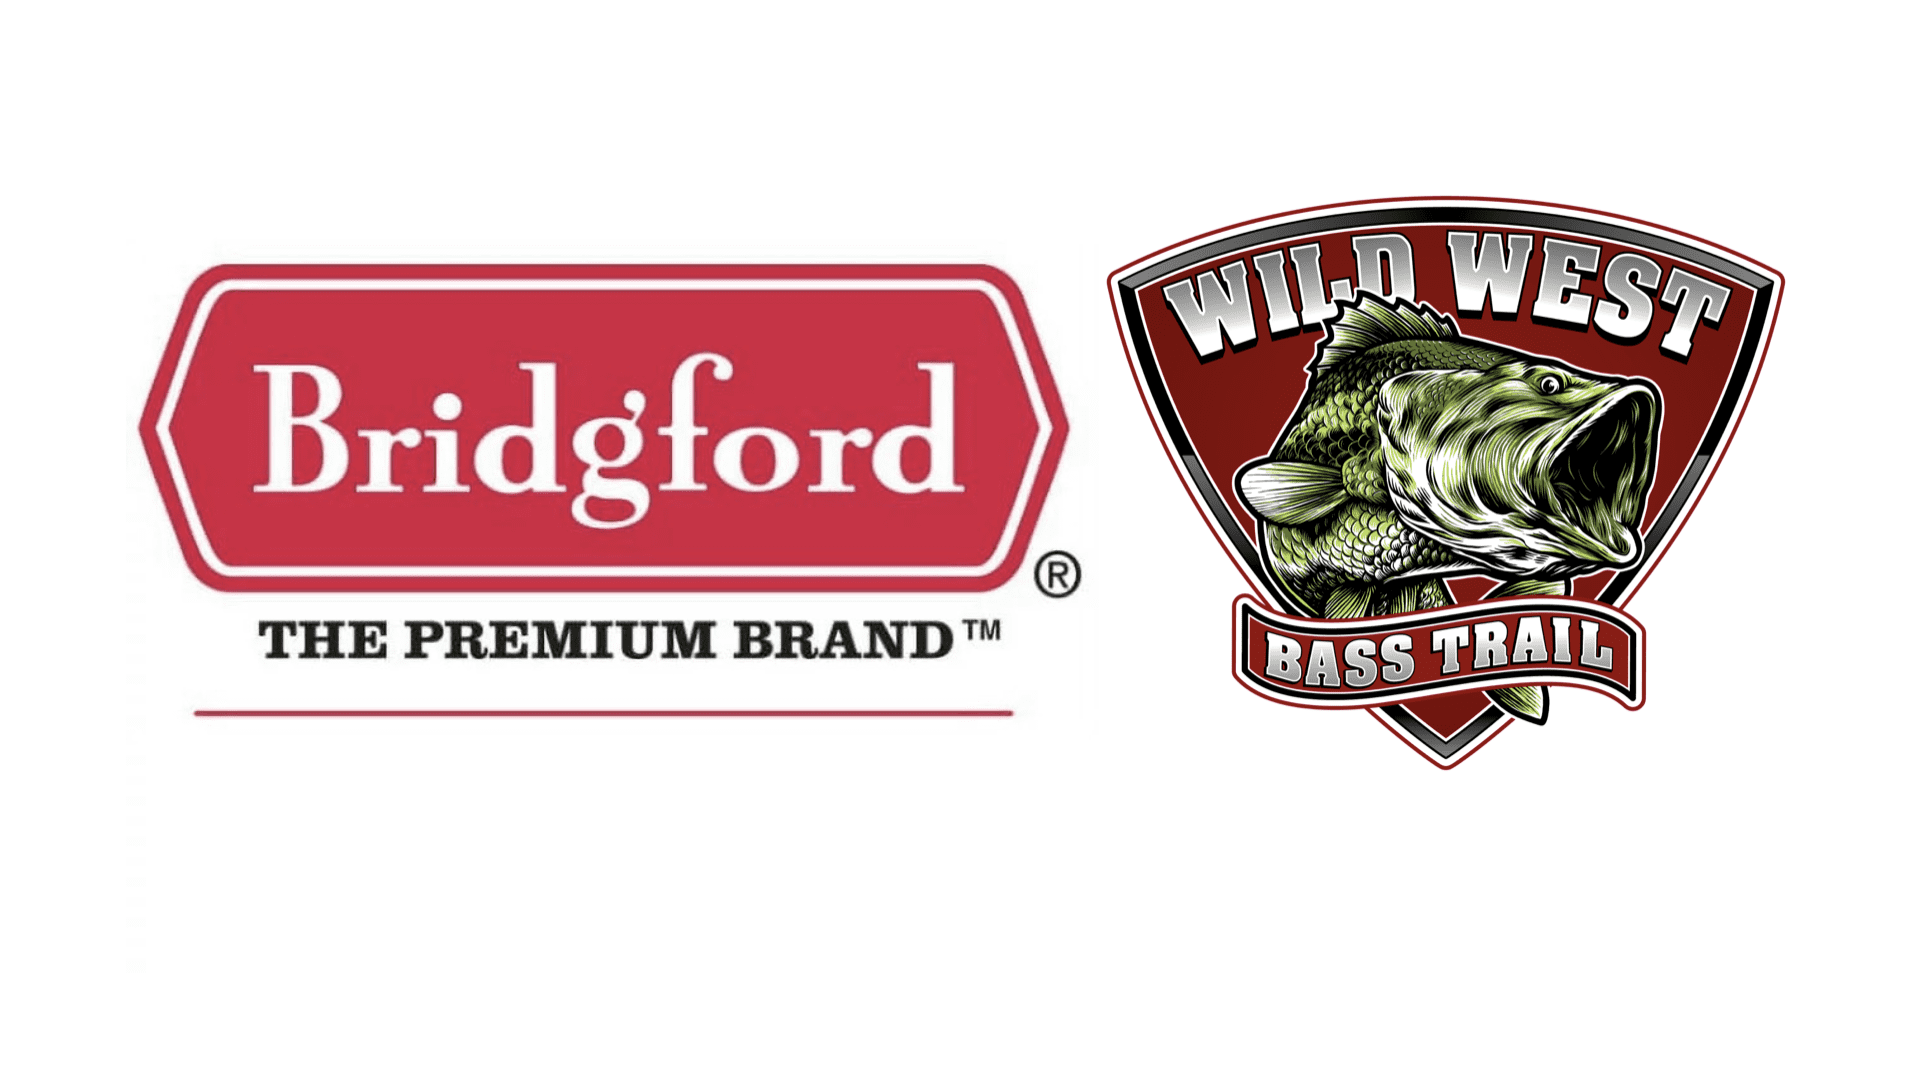 Bridgford Foods takes a stand: A fishing organization has been sued for defrauding fishermen